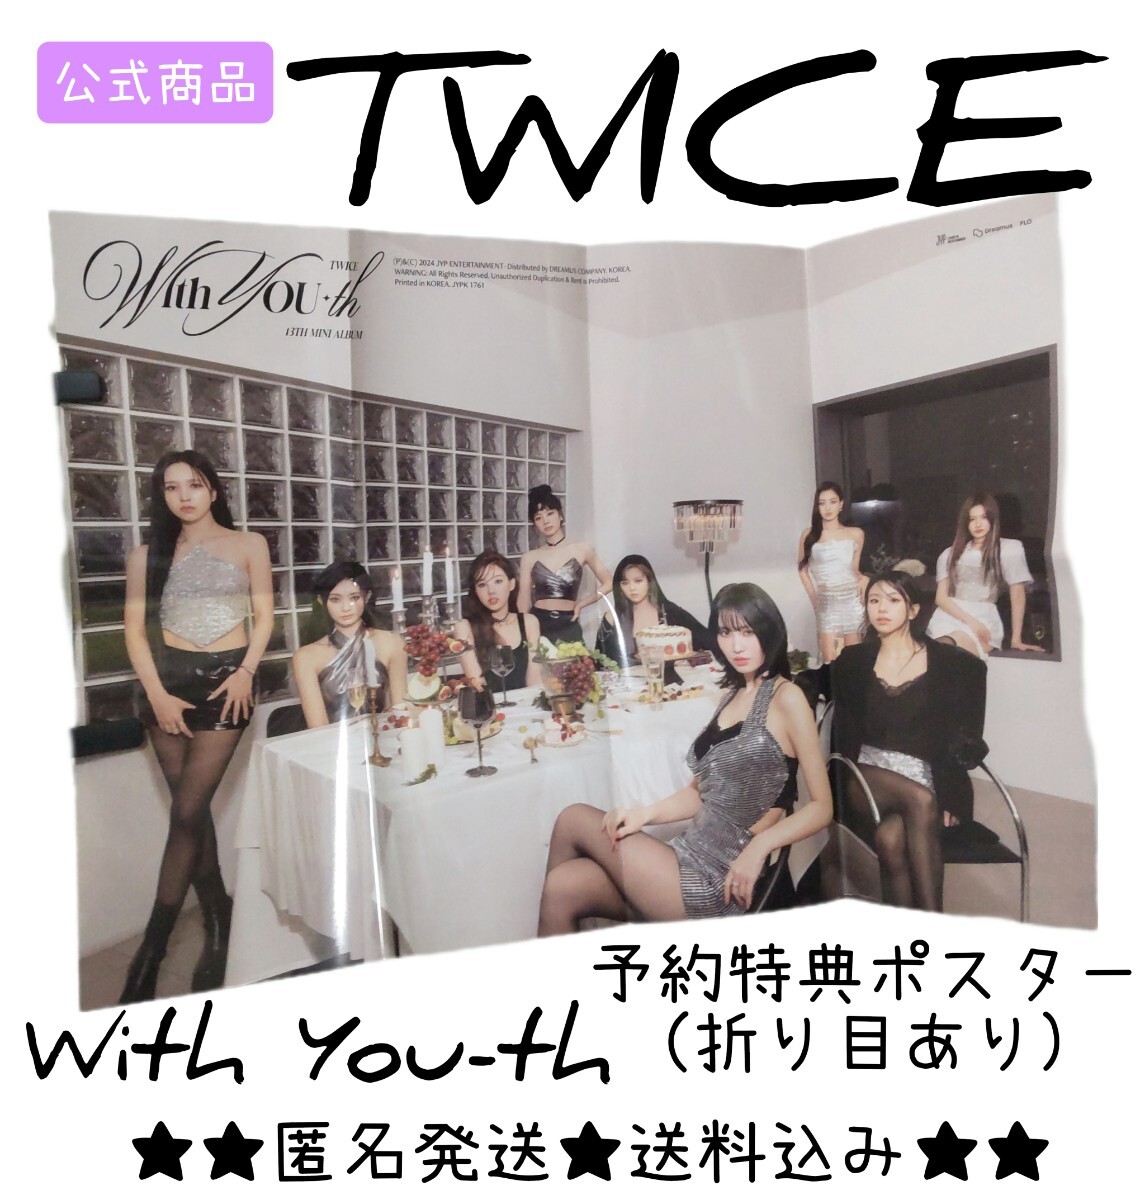 TWICE★With YOU-th(Glowing ver.)の予約特典ポスター【折り目あり】_画像1